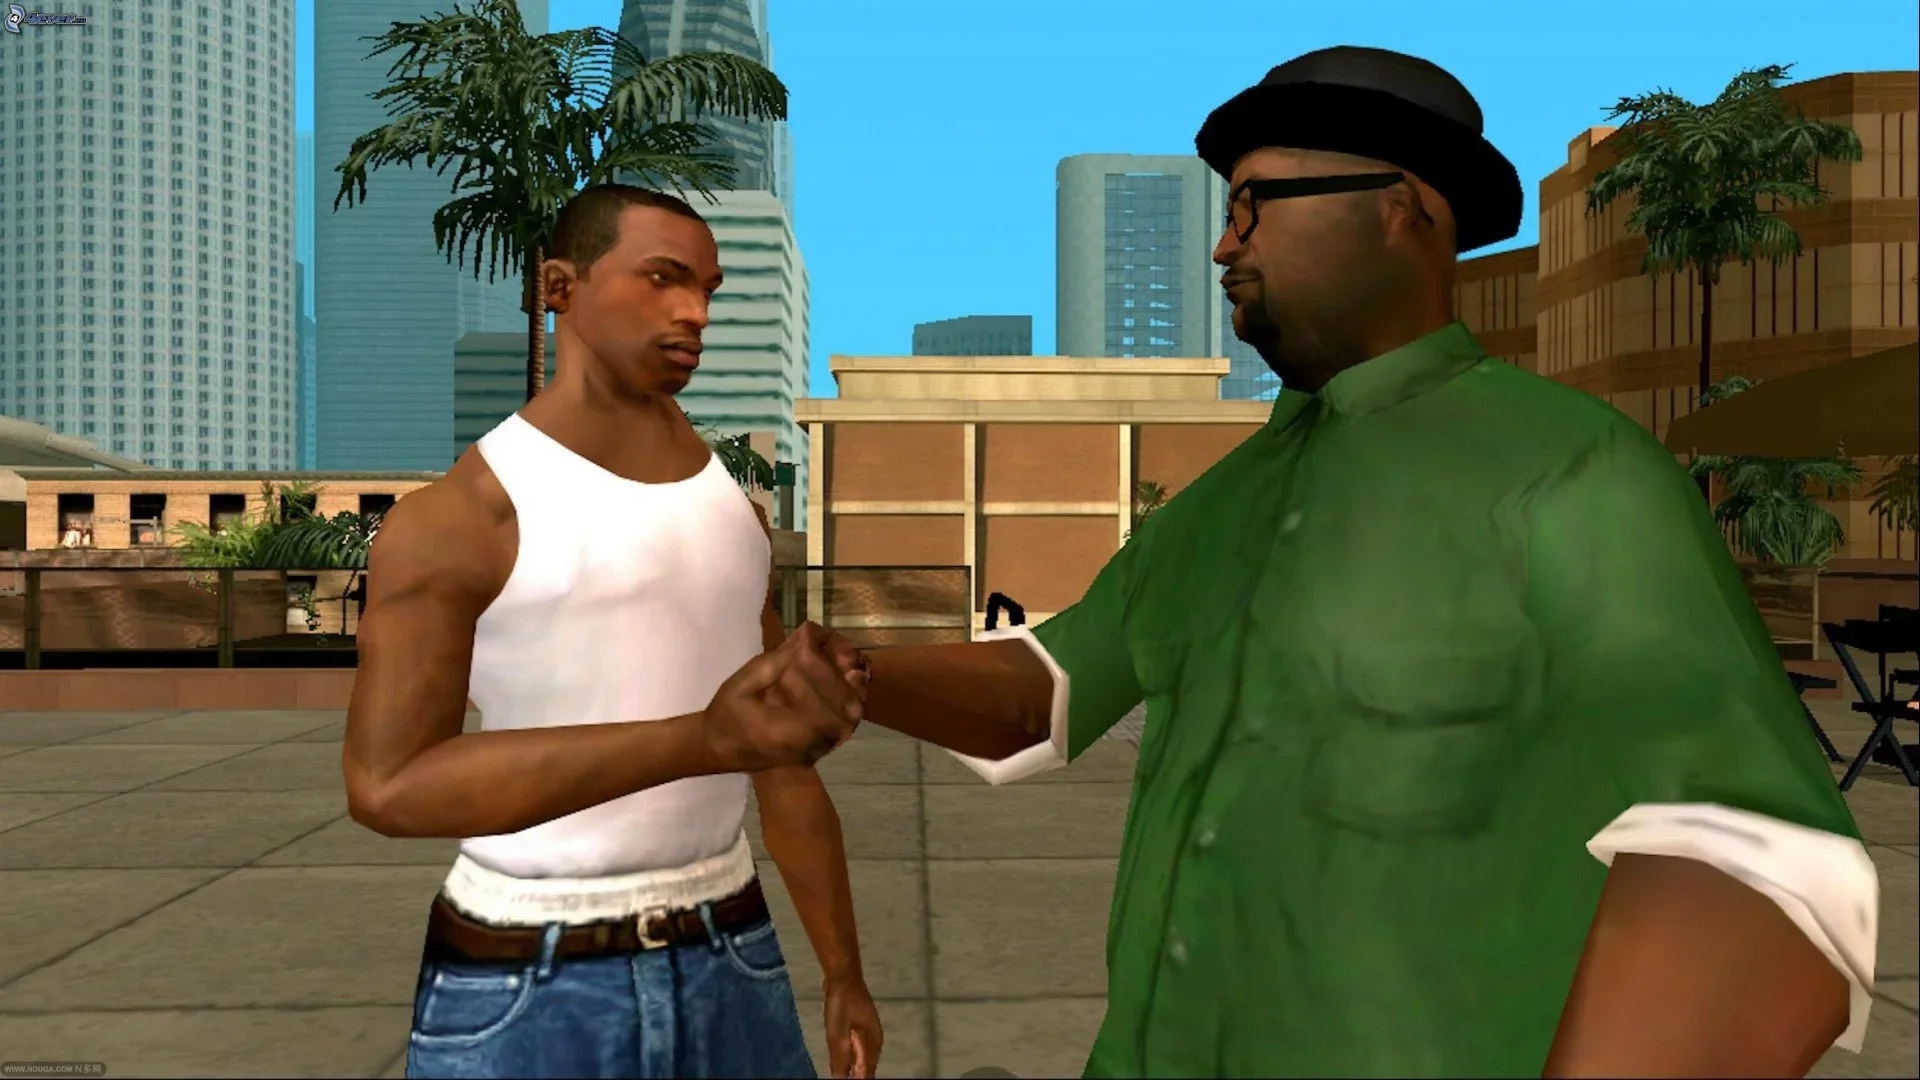 The neural network showed what a film based on GTA: San Andreas could look like